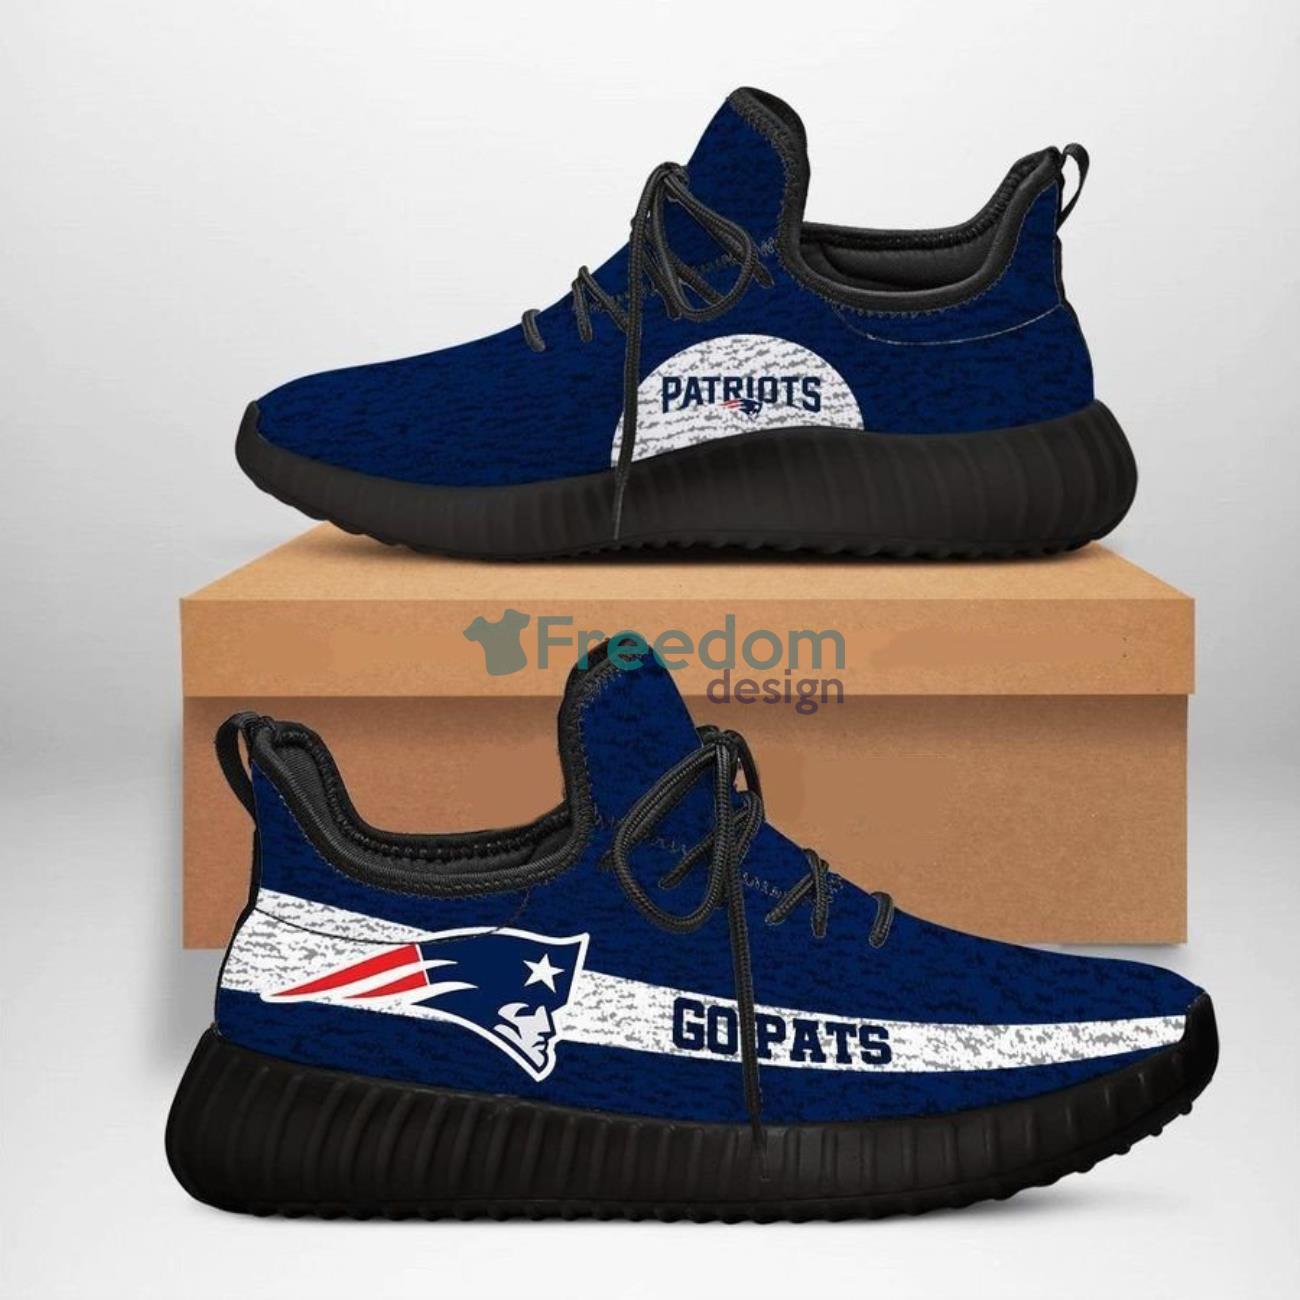 New England Patriots Sneaker Reze Shoes For Fansn